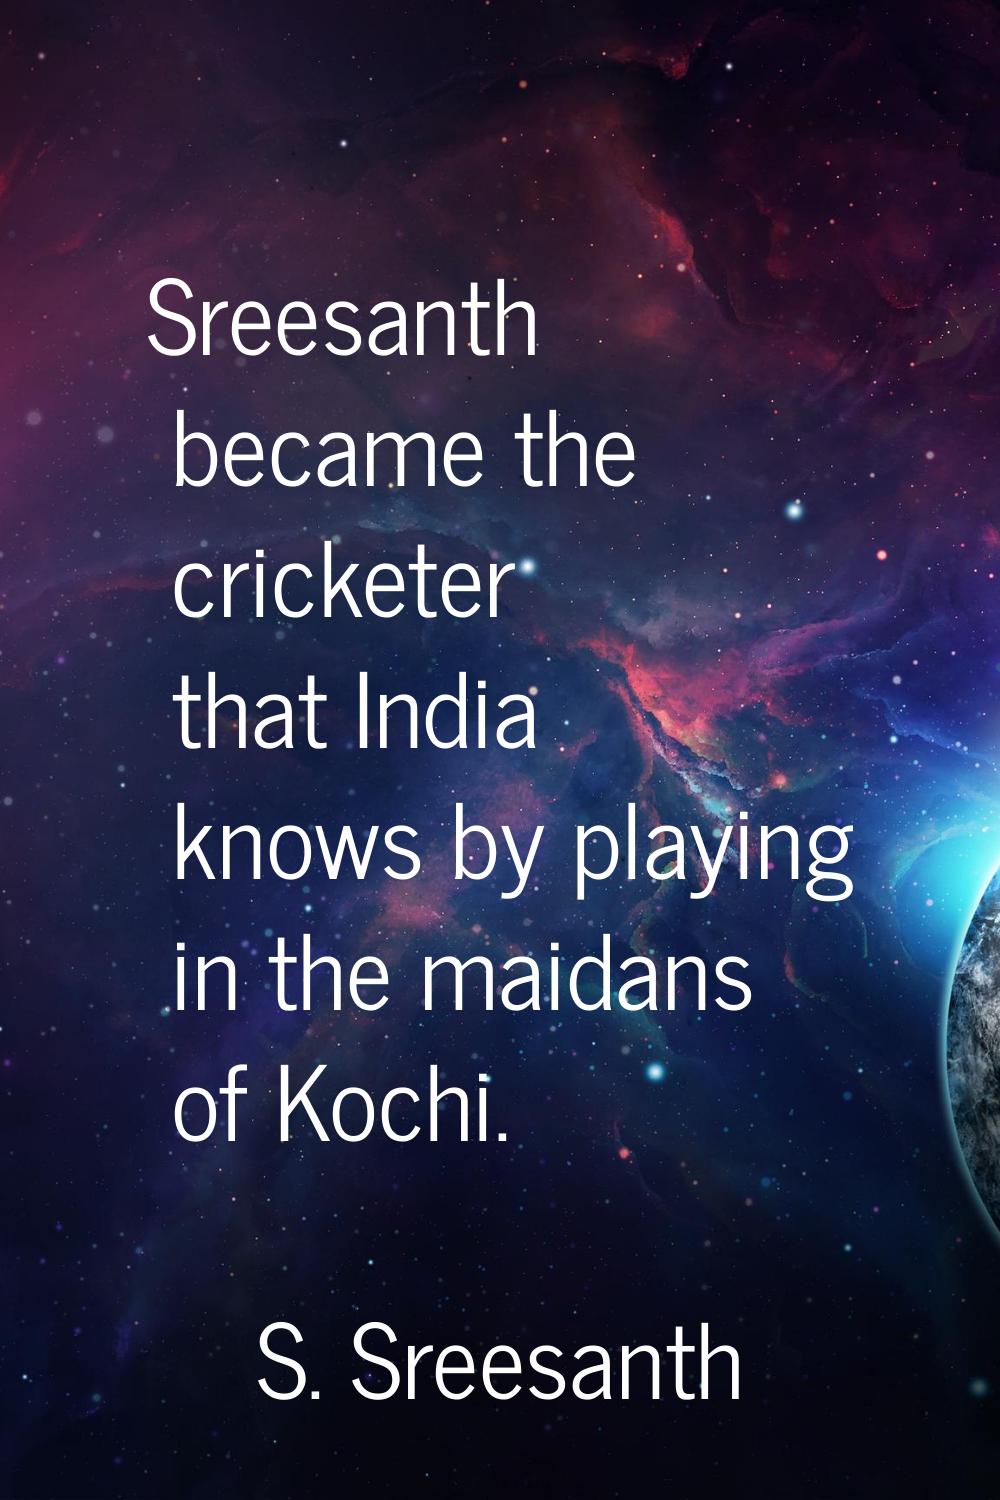 Sreesanth became the cricketer that India knows by playing in the maidans of Kochi.